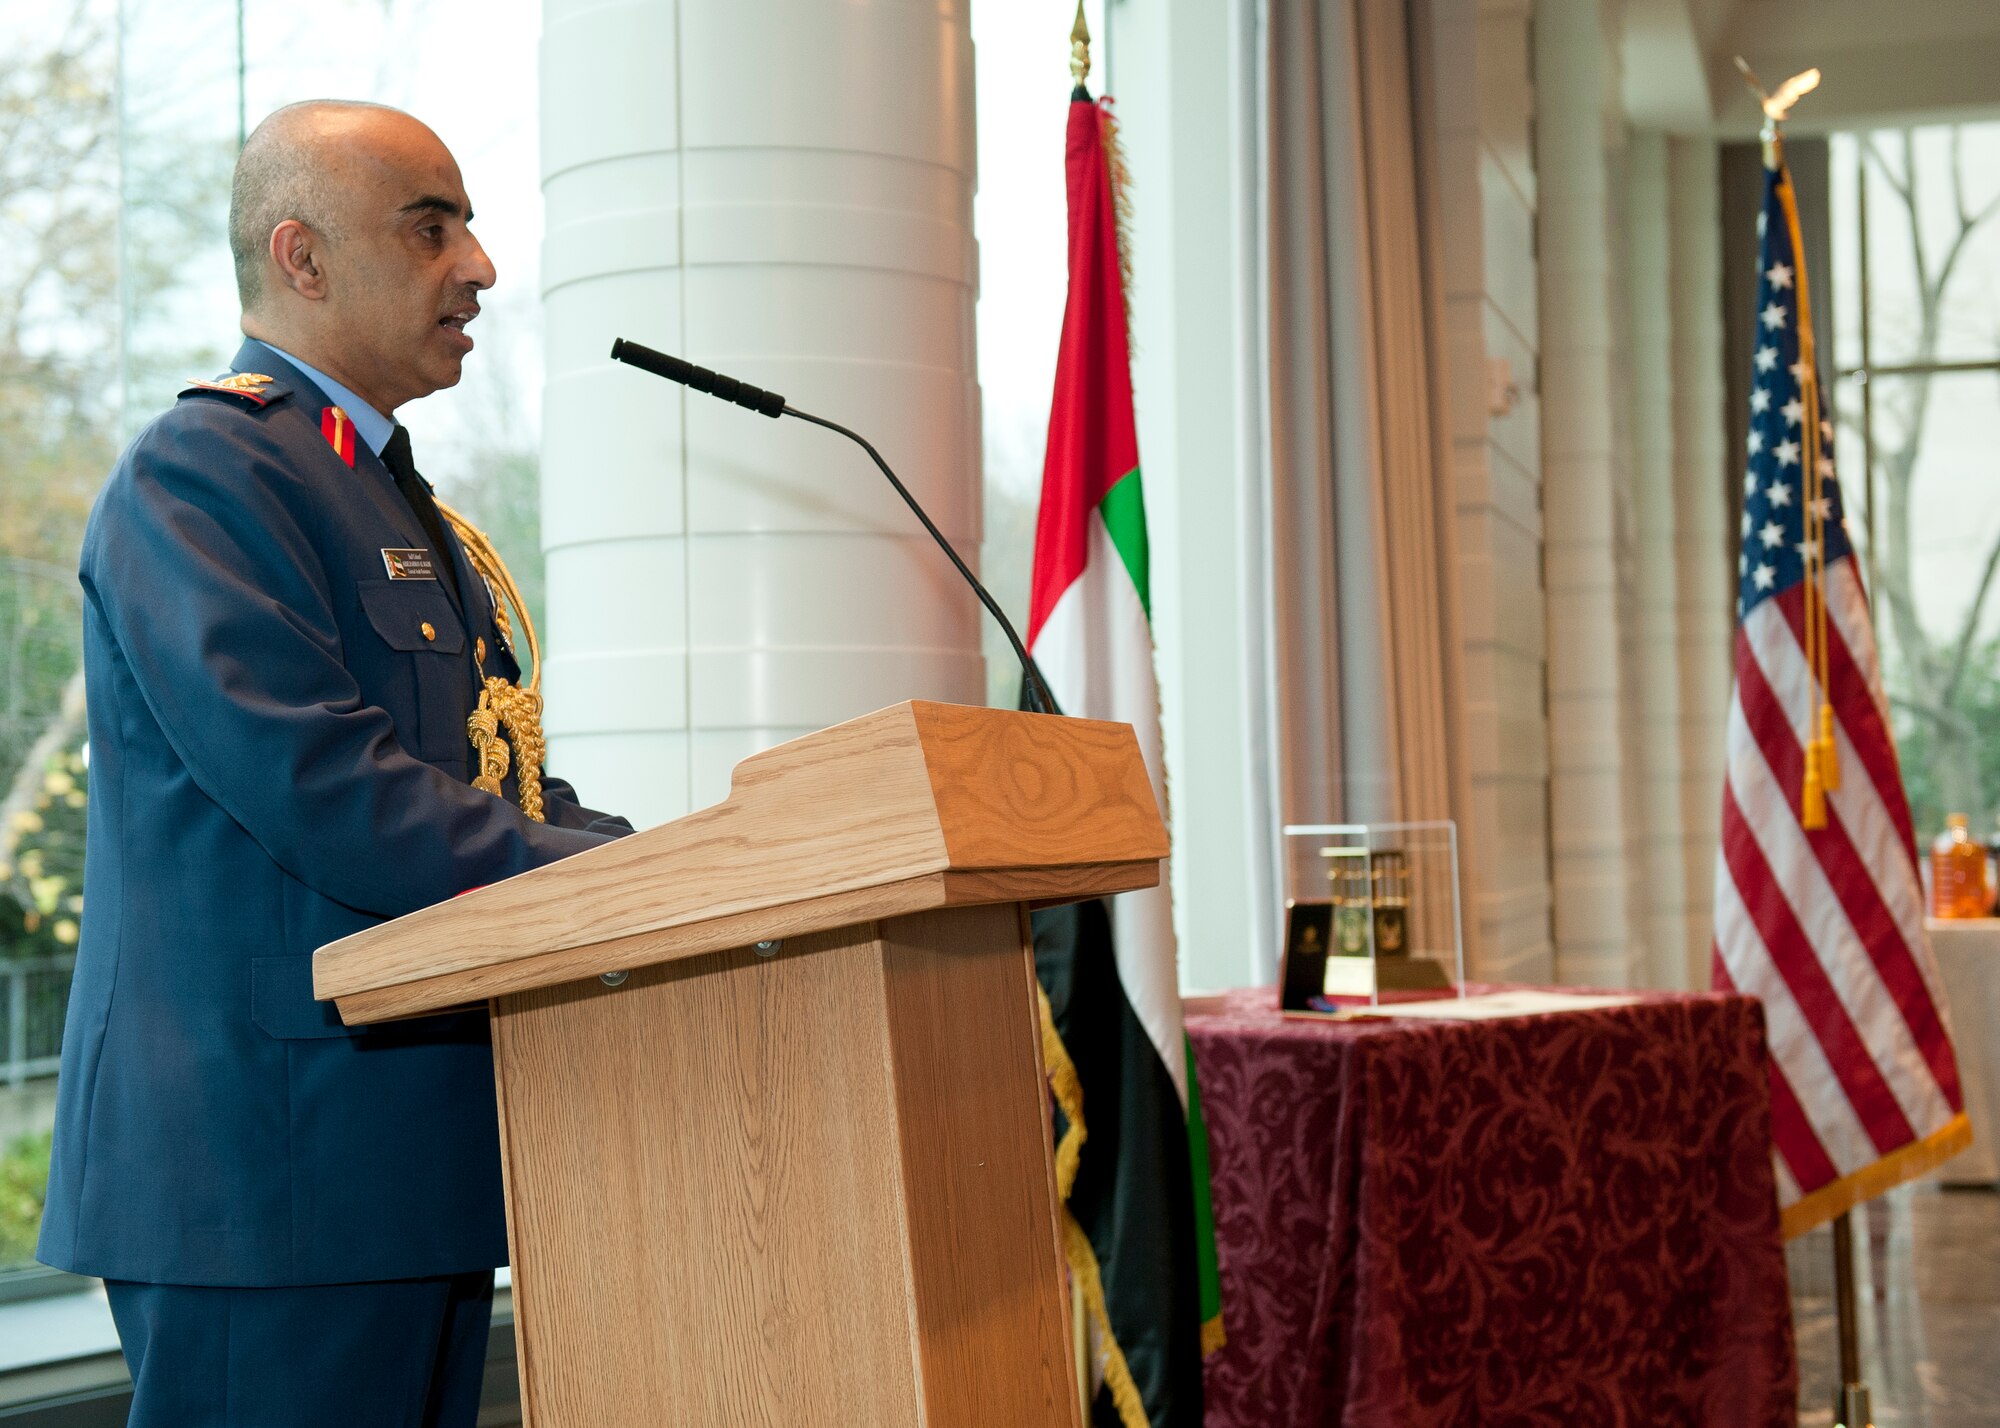 The United Emirates (UAE) Air Attaché Col. Abdelrahmn Al-Mazmiby gives opening remarks before presenting the Foreign Operations Missions Medal to Air Combat Command commander U.S. Air Force Gen. Mike Hostage III during a ceremony at the UAE Embassy, Washington D.C. on Nov. 15, 2011. (U.S. Air Force photo by Jim Varhegyi/Released)